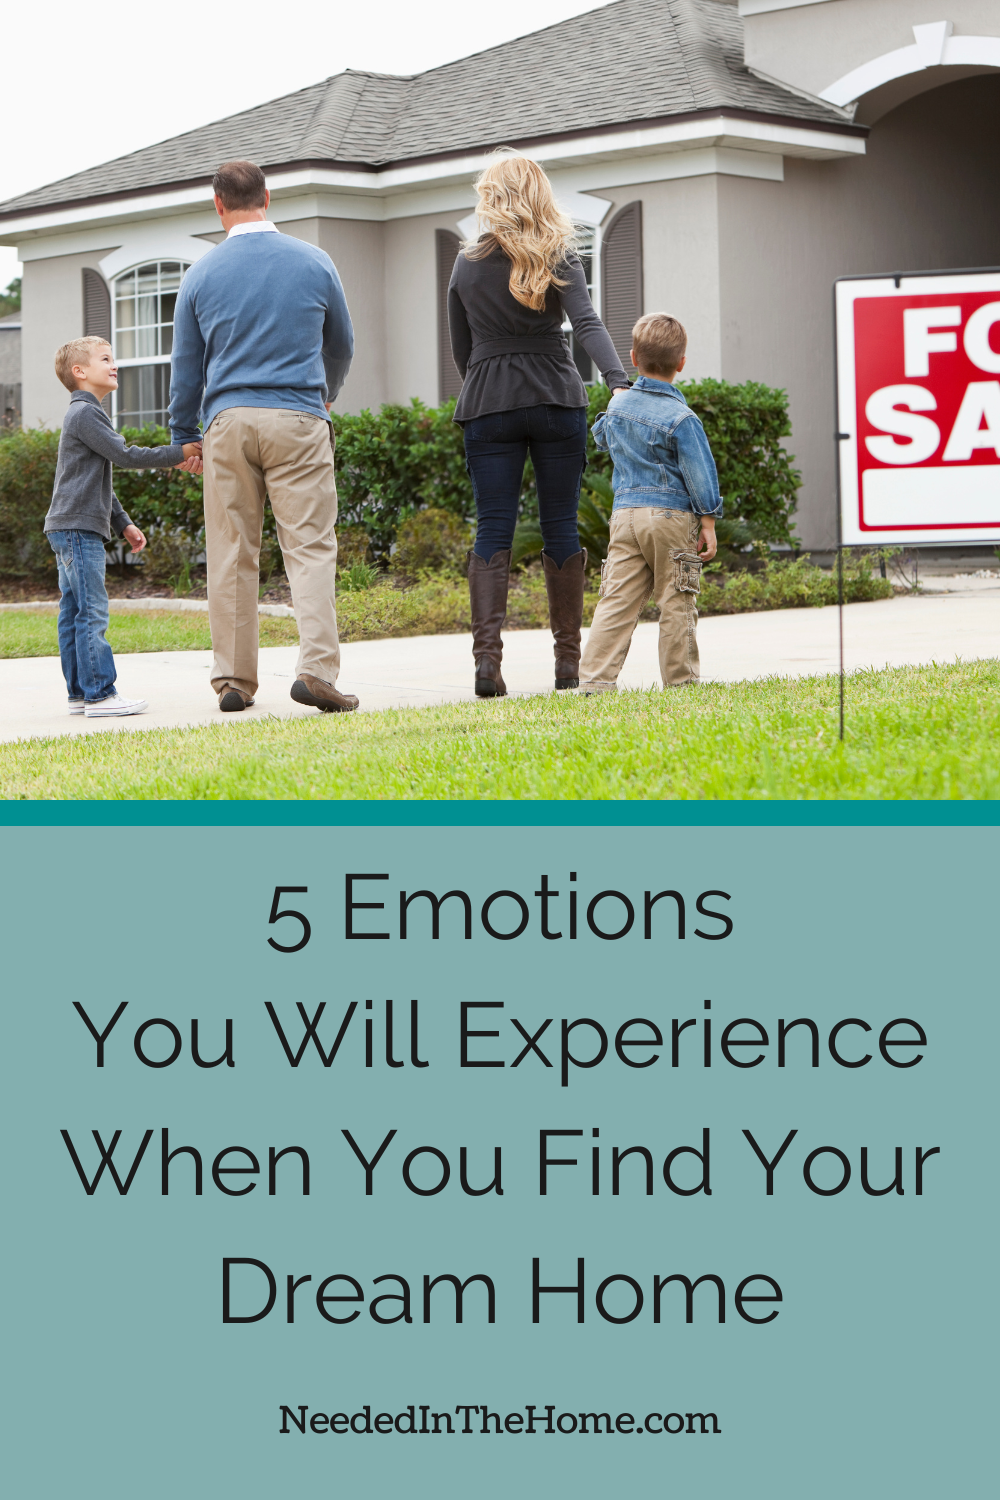 pinterest pin description 5 emotions you will experience when you find your dream home family looking at home for sale neededinthehome